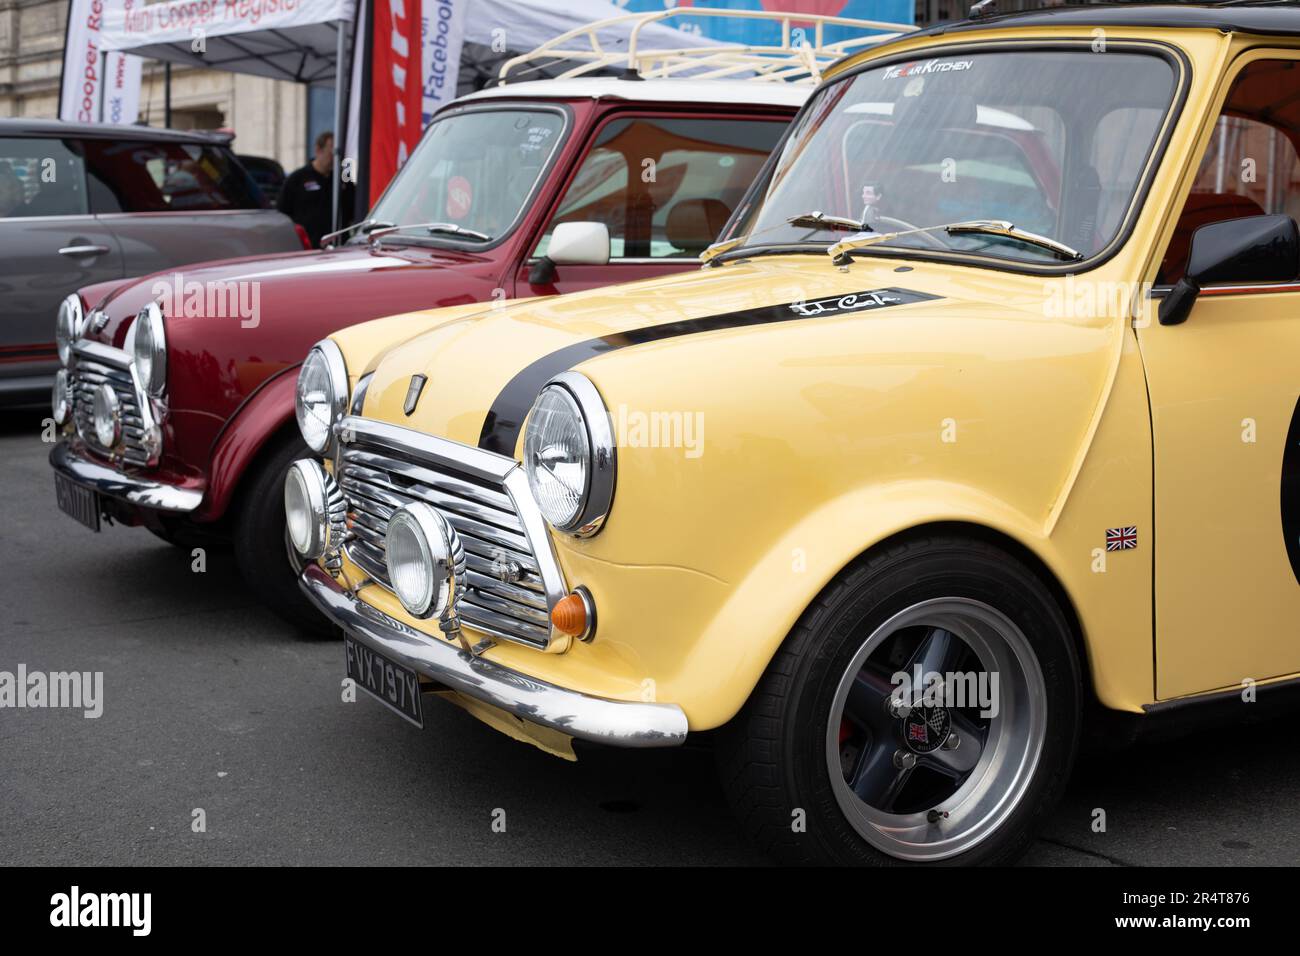 https://c8.alamy.com/comp/2R4T876/brighton-uk-may-19-2019-a-yellow-and-a-red-john-cooper-mini-car-taking-part-in-the-london-brighton-mini-run-2019-on-the-seafront-in-brighton-2R4T876.jpg